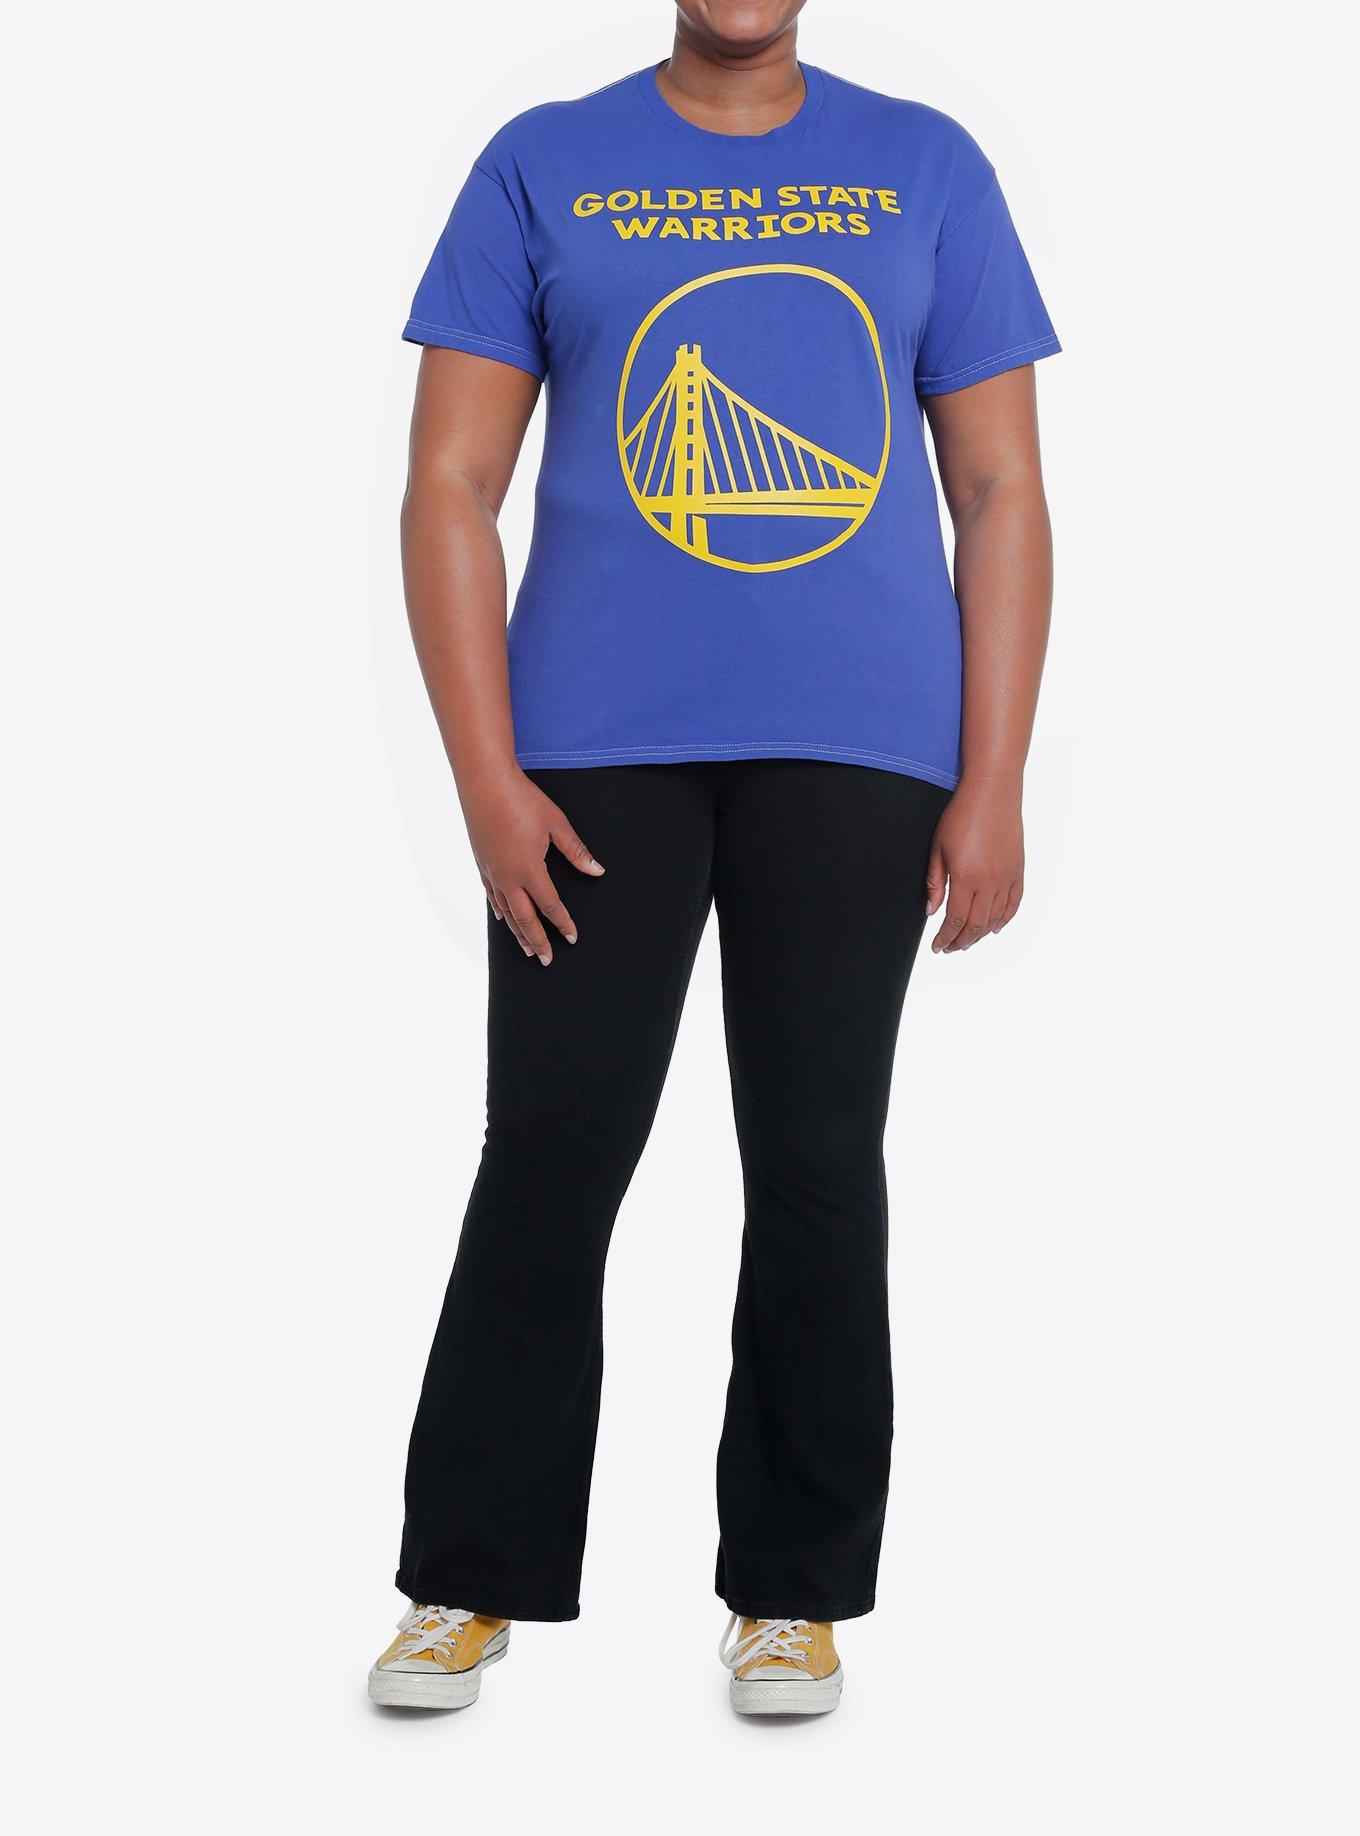 Her Universe NBA Los Angeles Lakers T-Shirt